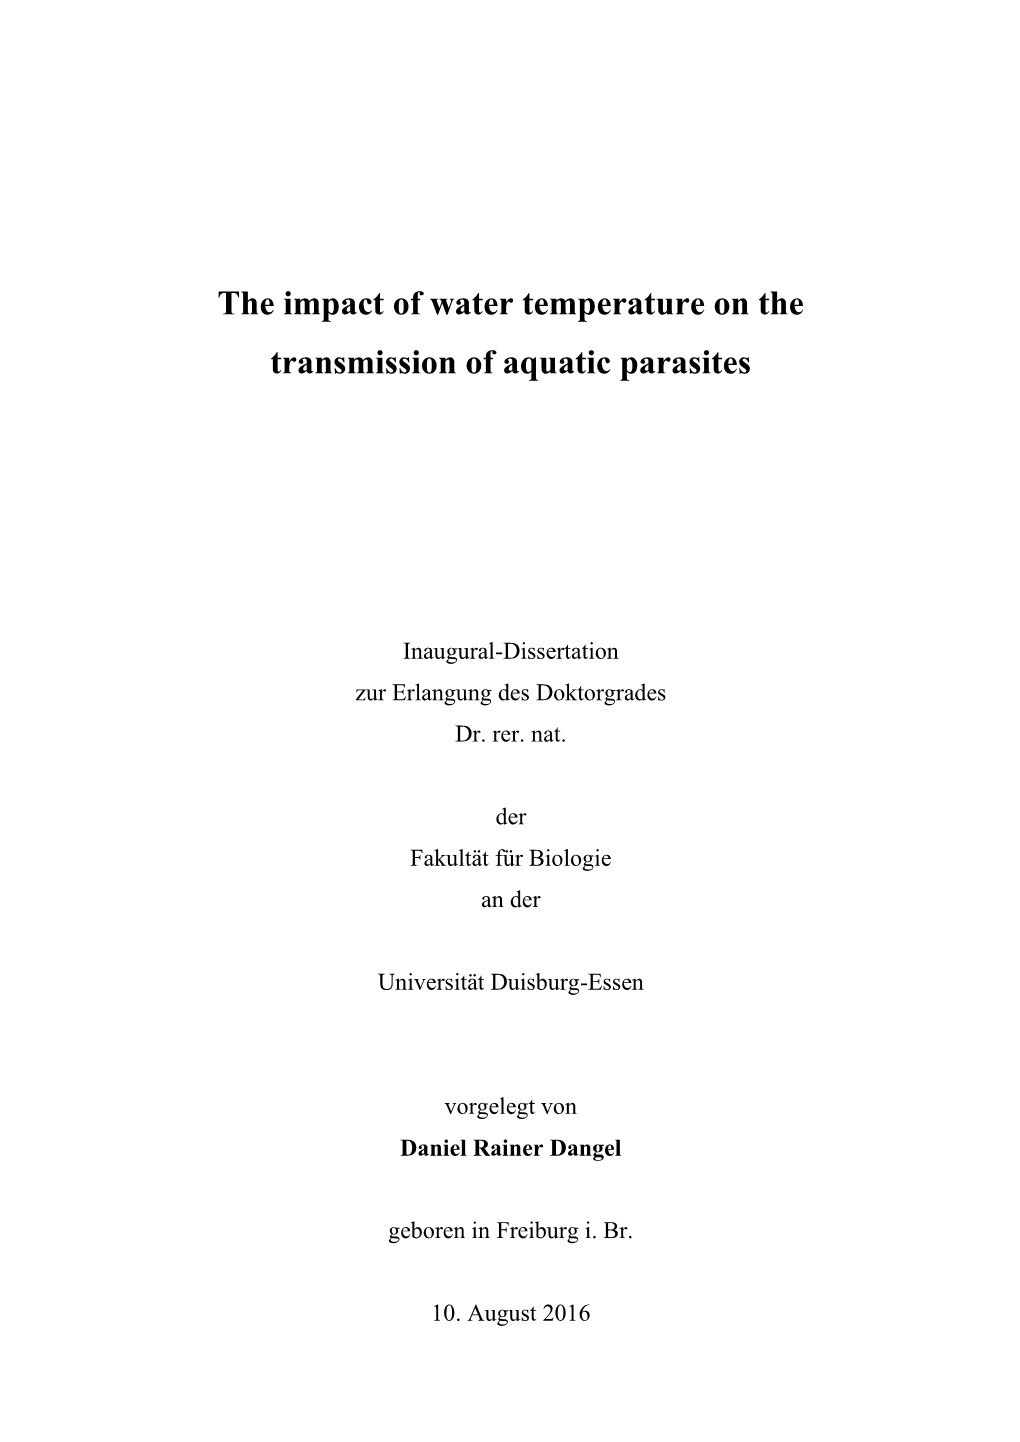 The Impact of Water Temperature on the Transmission of Aquatic Parasites